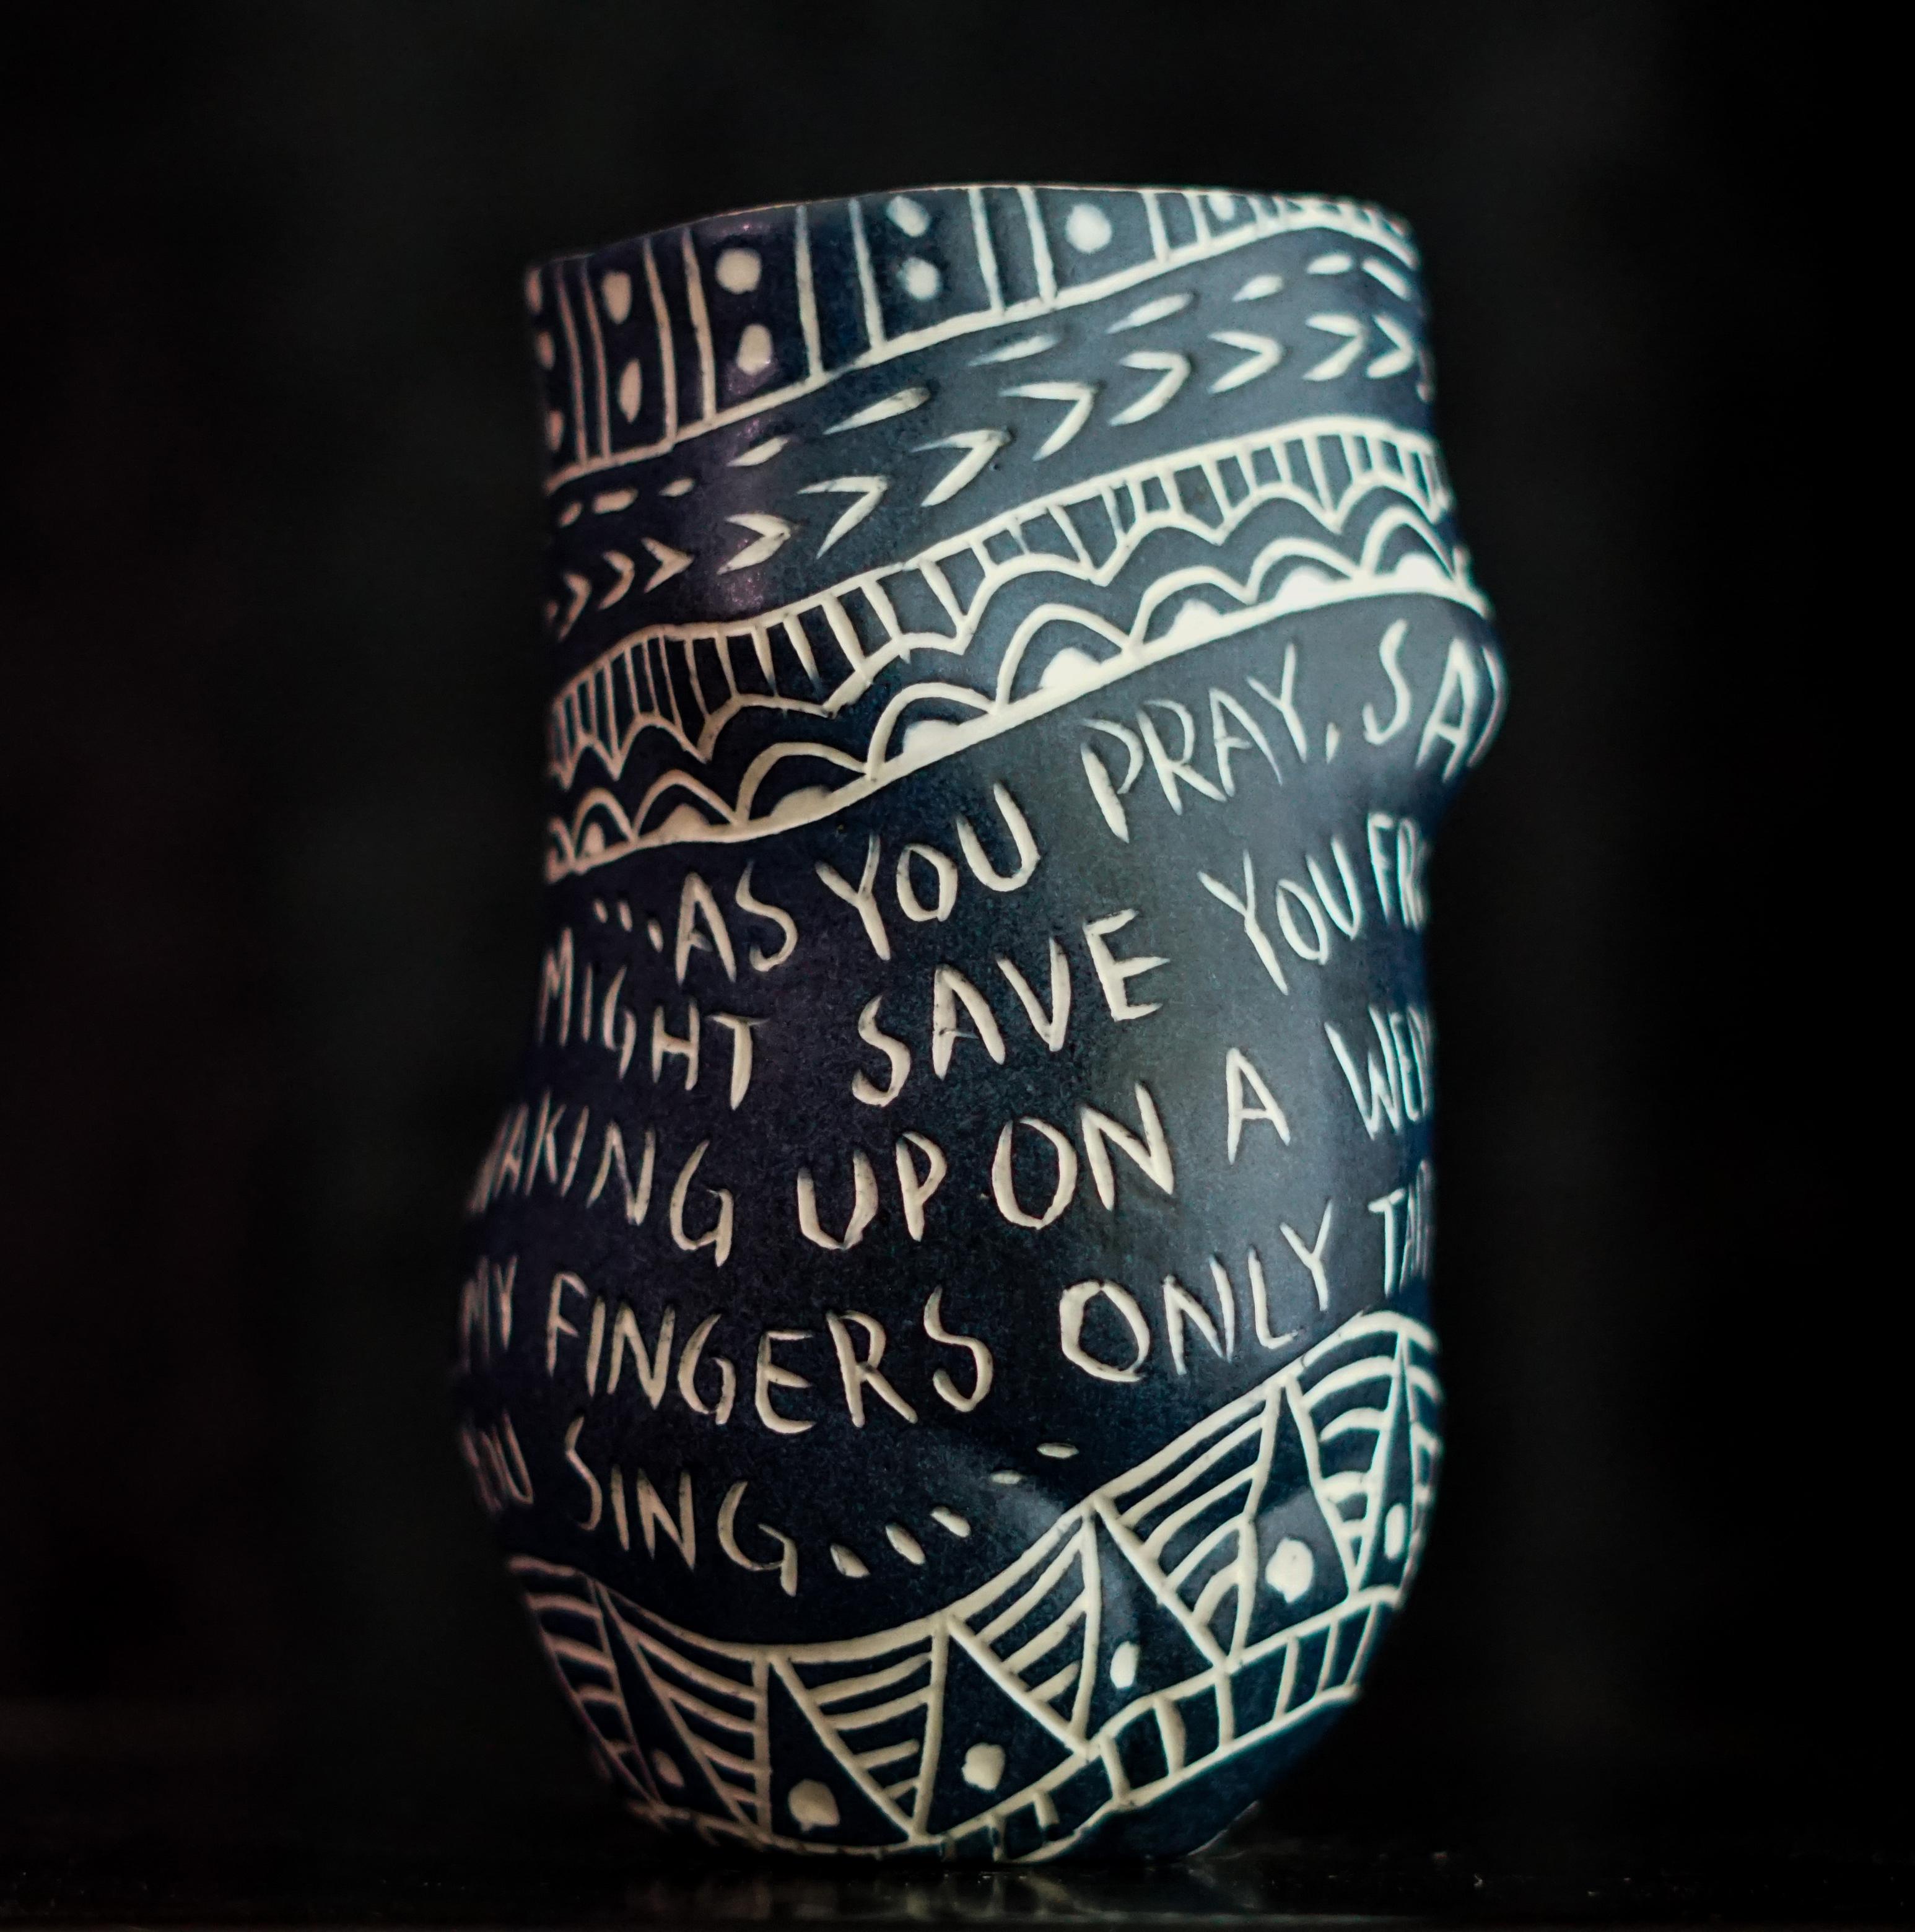 “As You Pray...” 2019
From the series Fragments of Our Love Story
Porcelain cup with sgraffito detailing
5.5 x 3 x 3 inches.

“As you pray...” As you pray, saying only my name, so I might save you from the monotony of waking up on a Wednesday by